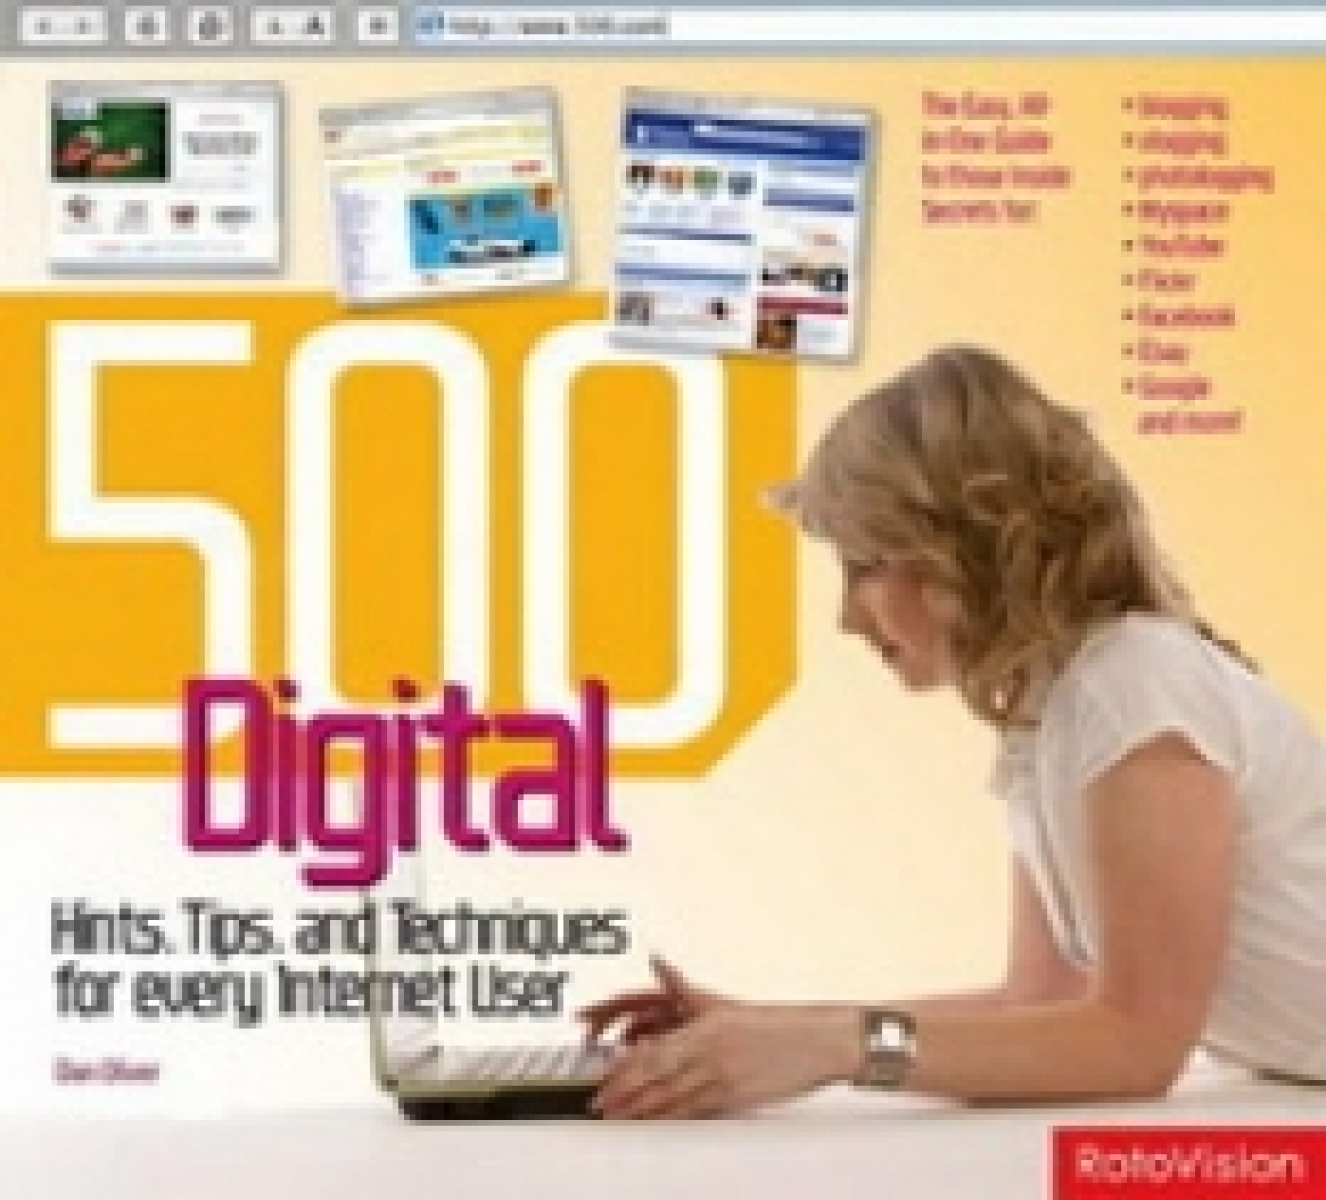 Dan O. 500 Digital Hints, Tips, Techniques for Every Internet User 